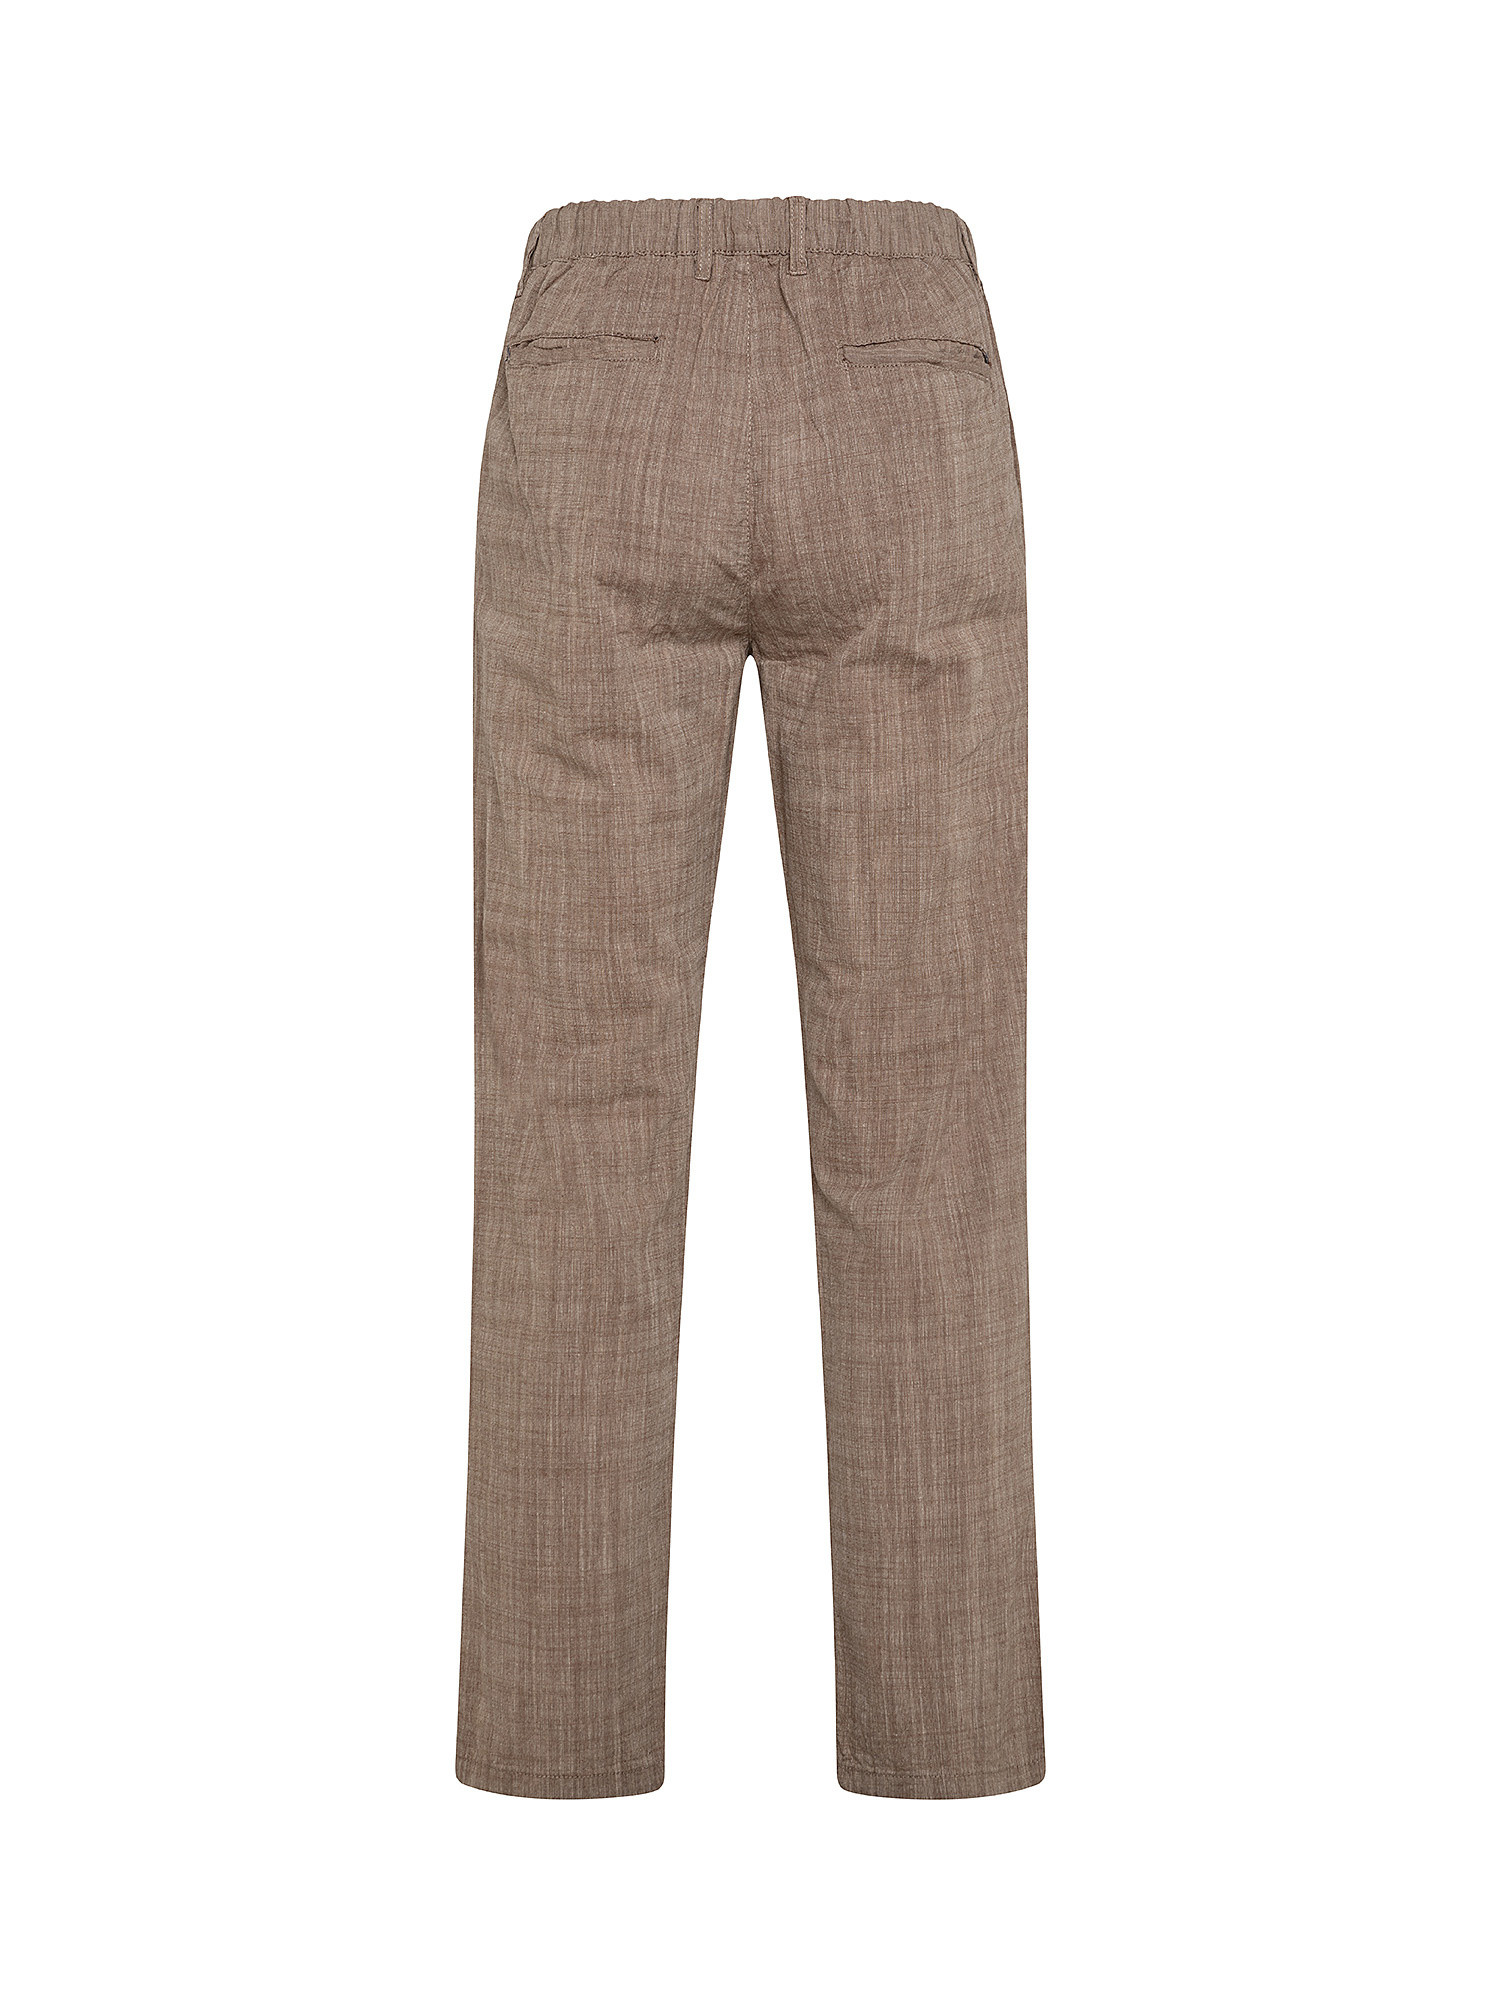 Pantalone con coulisse, Beige, large image number 1